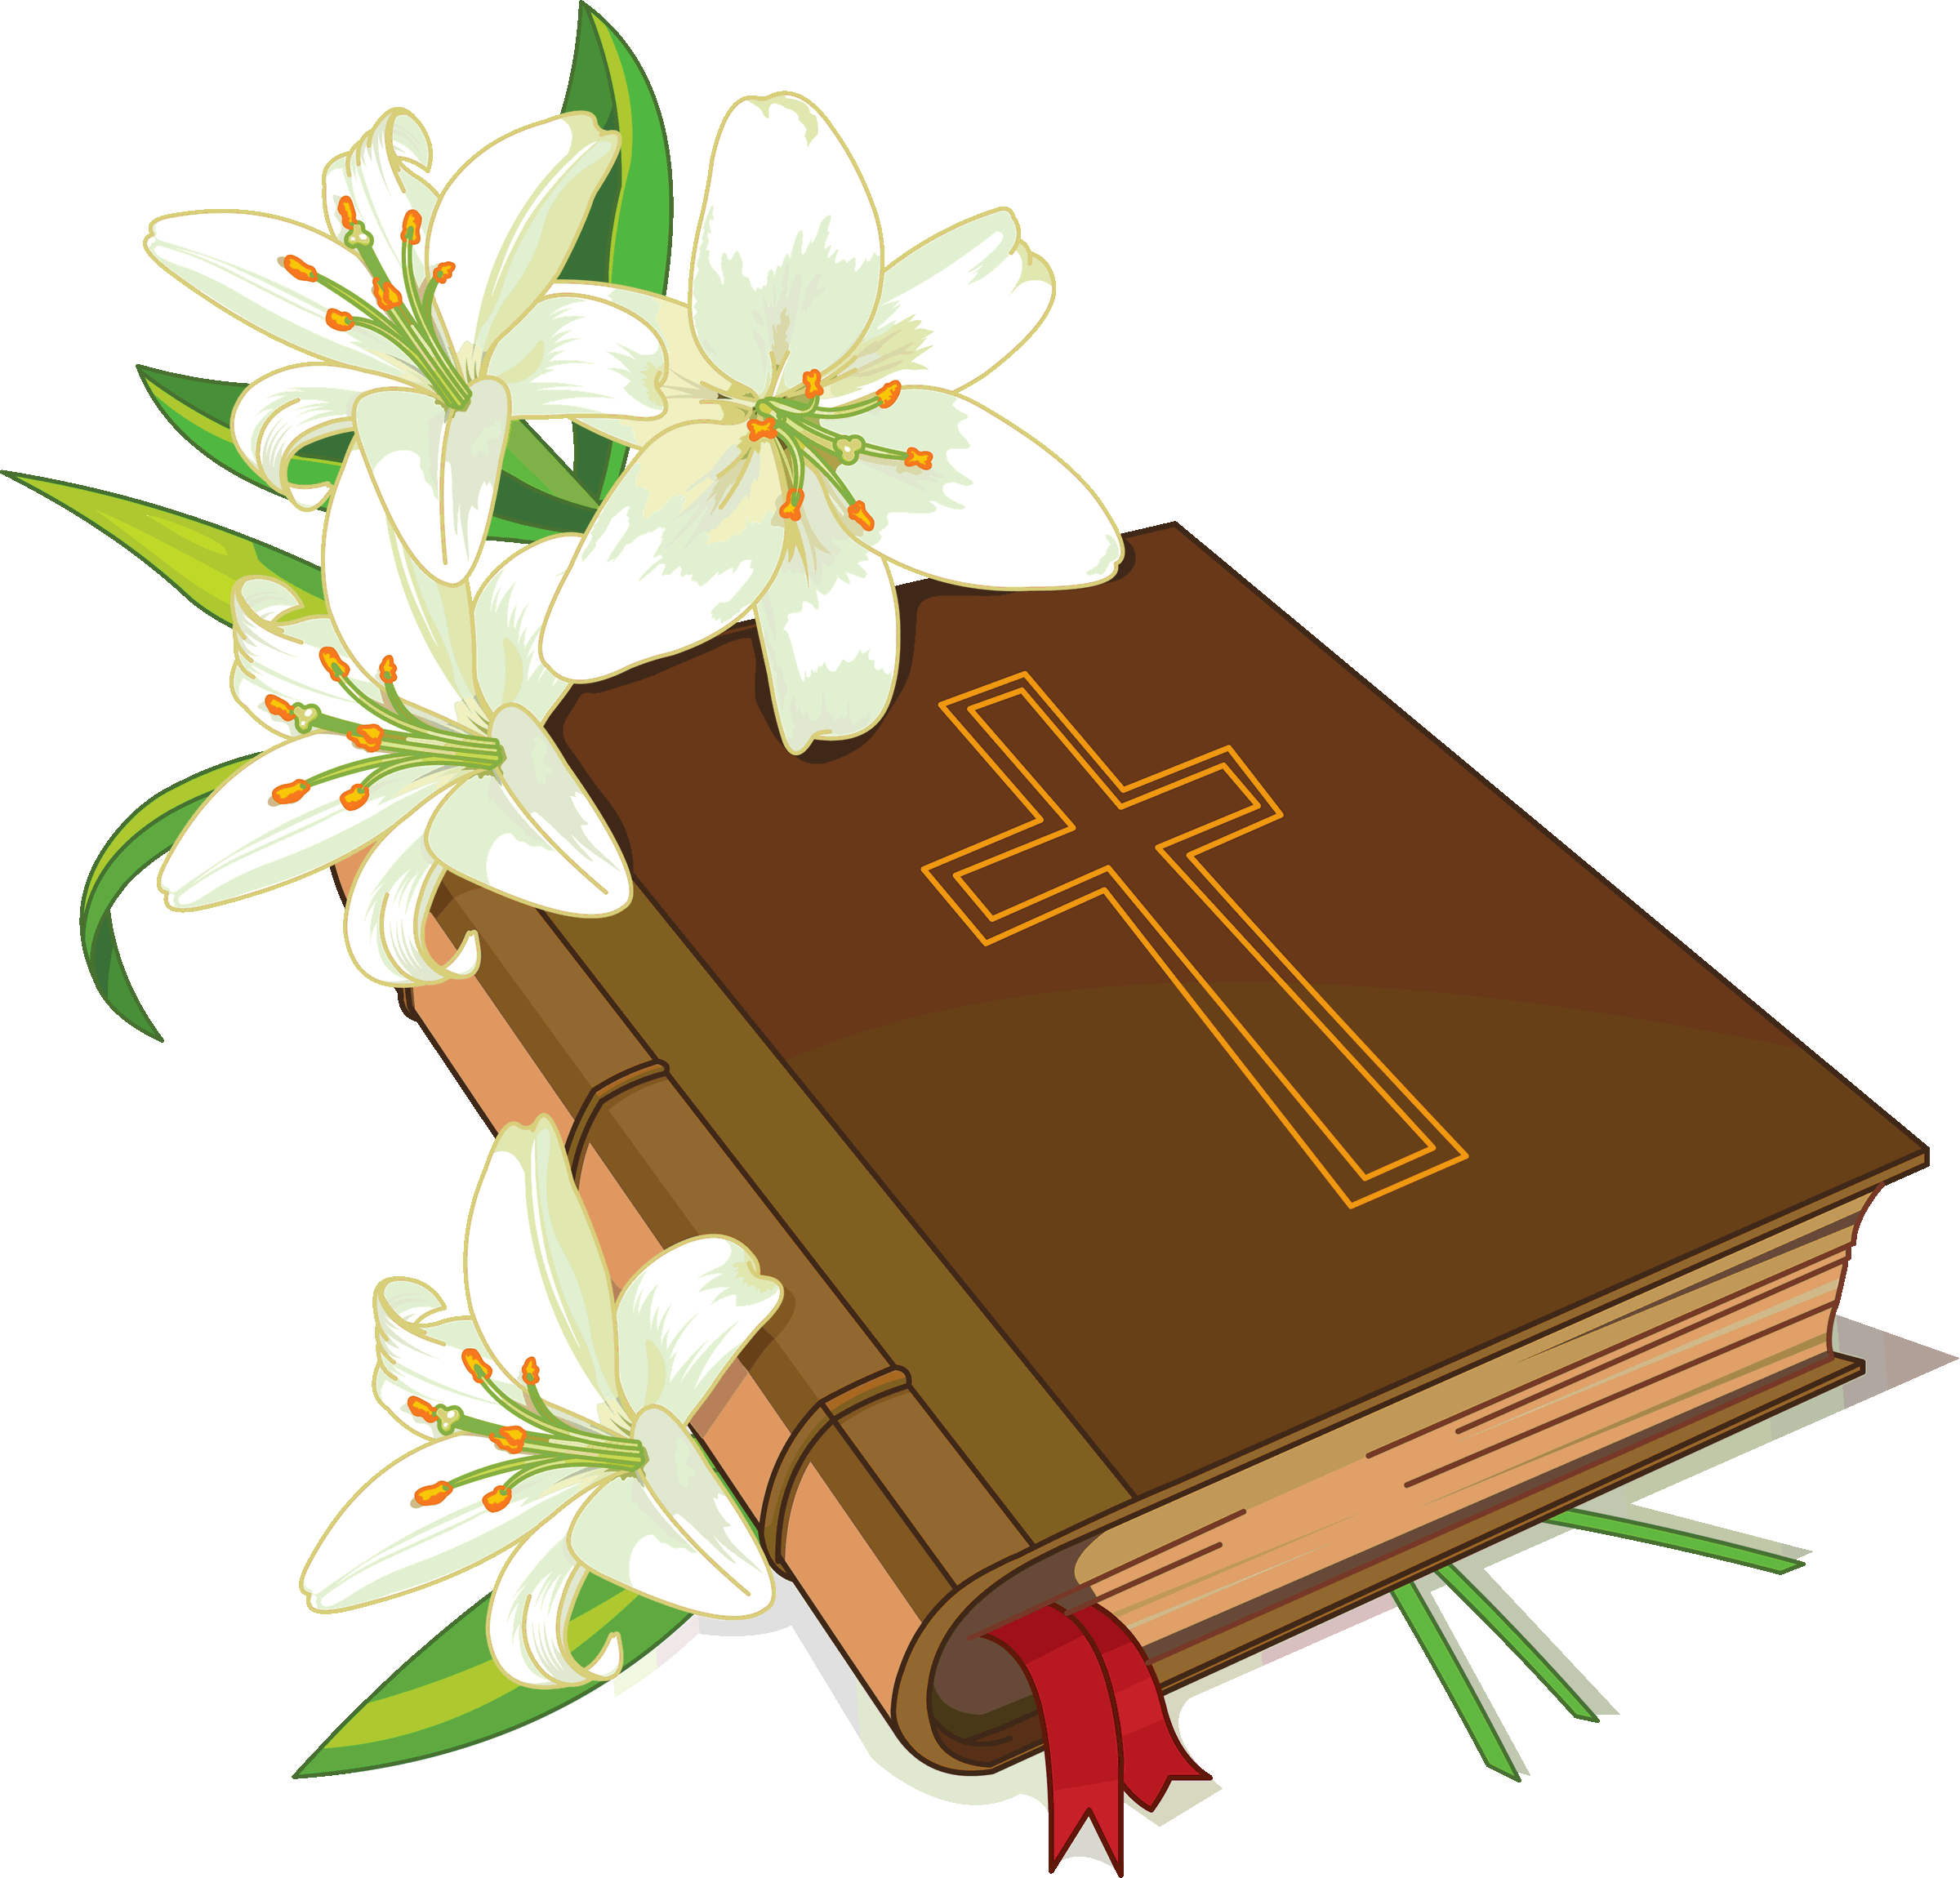 christian clipart and images - photo #34